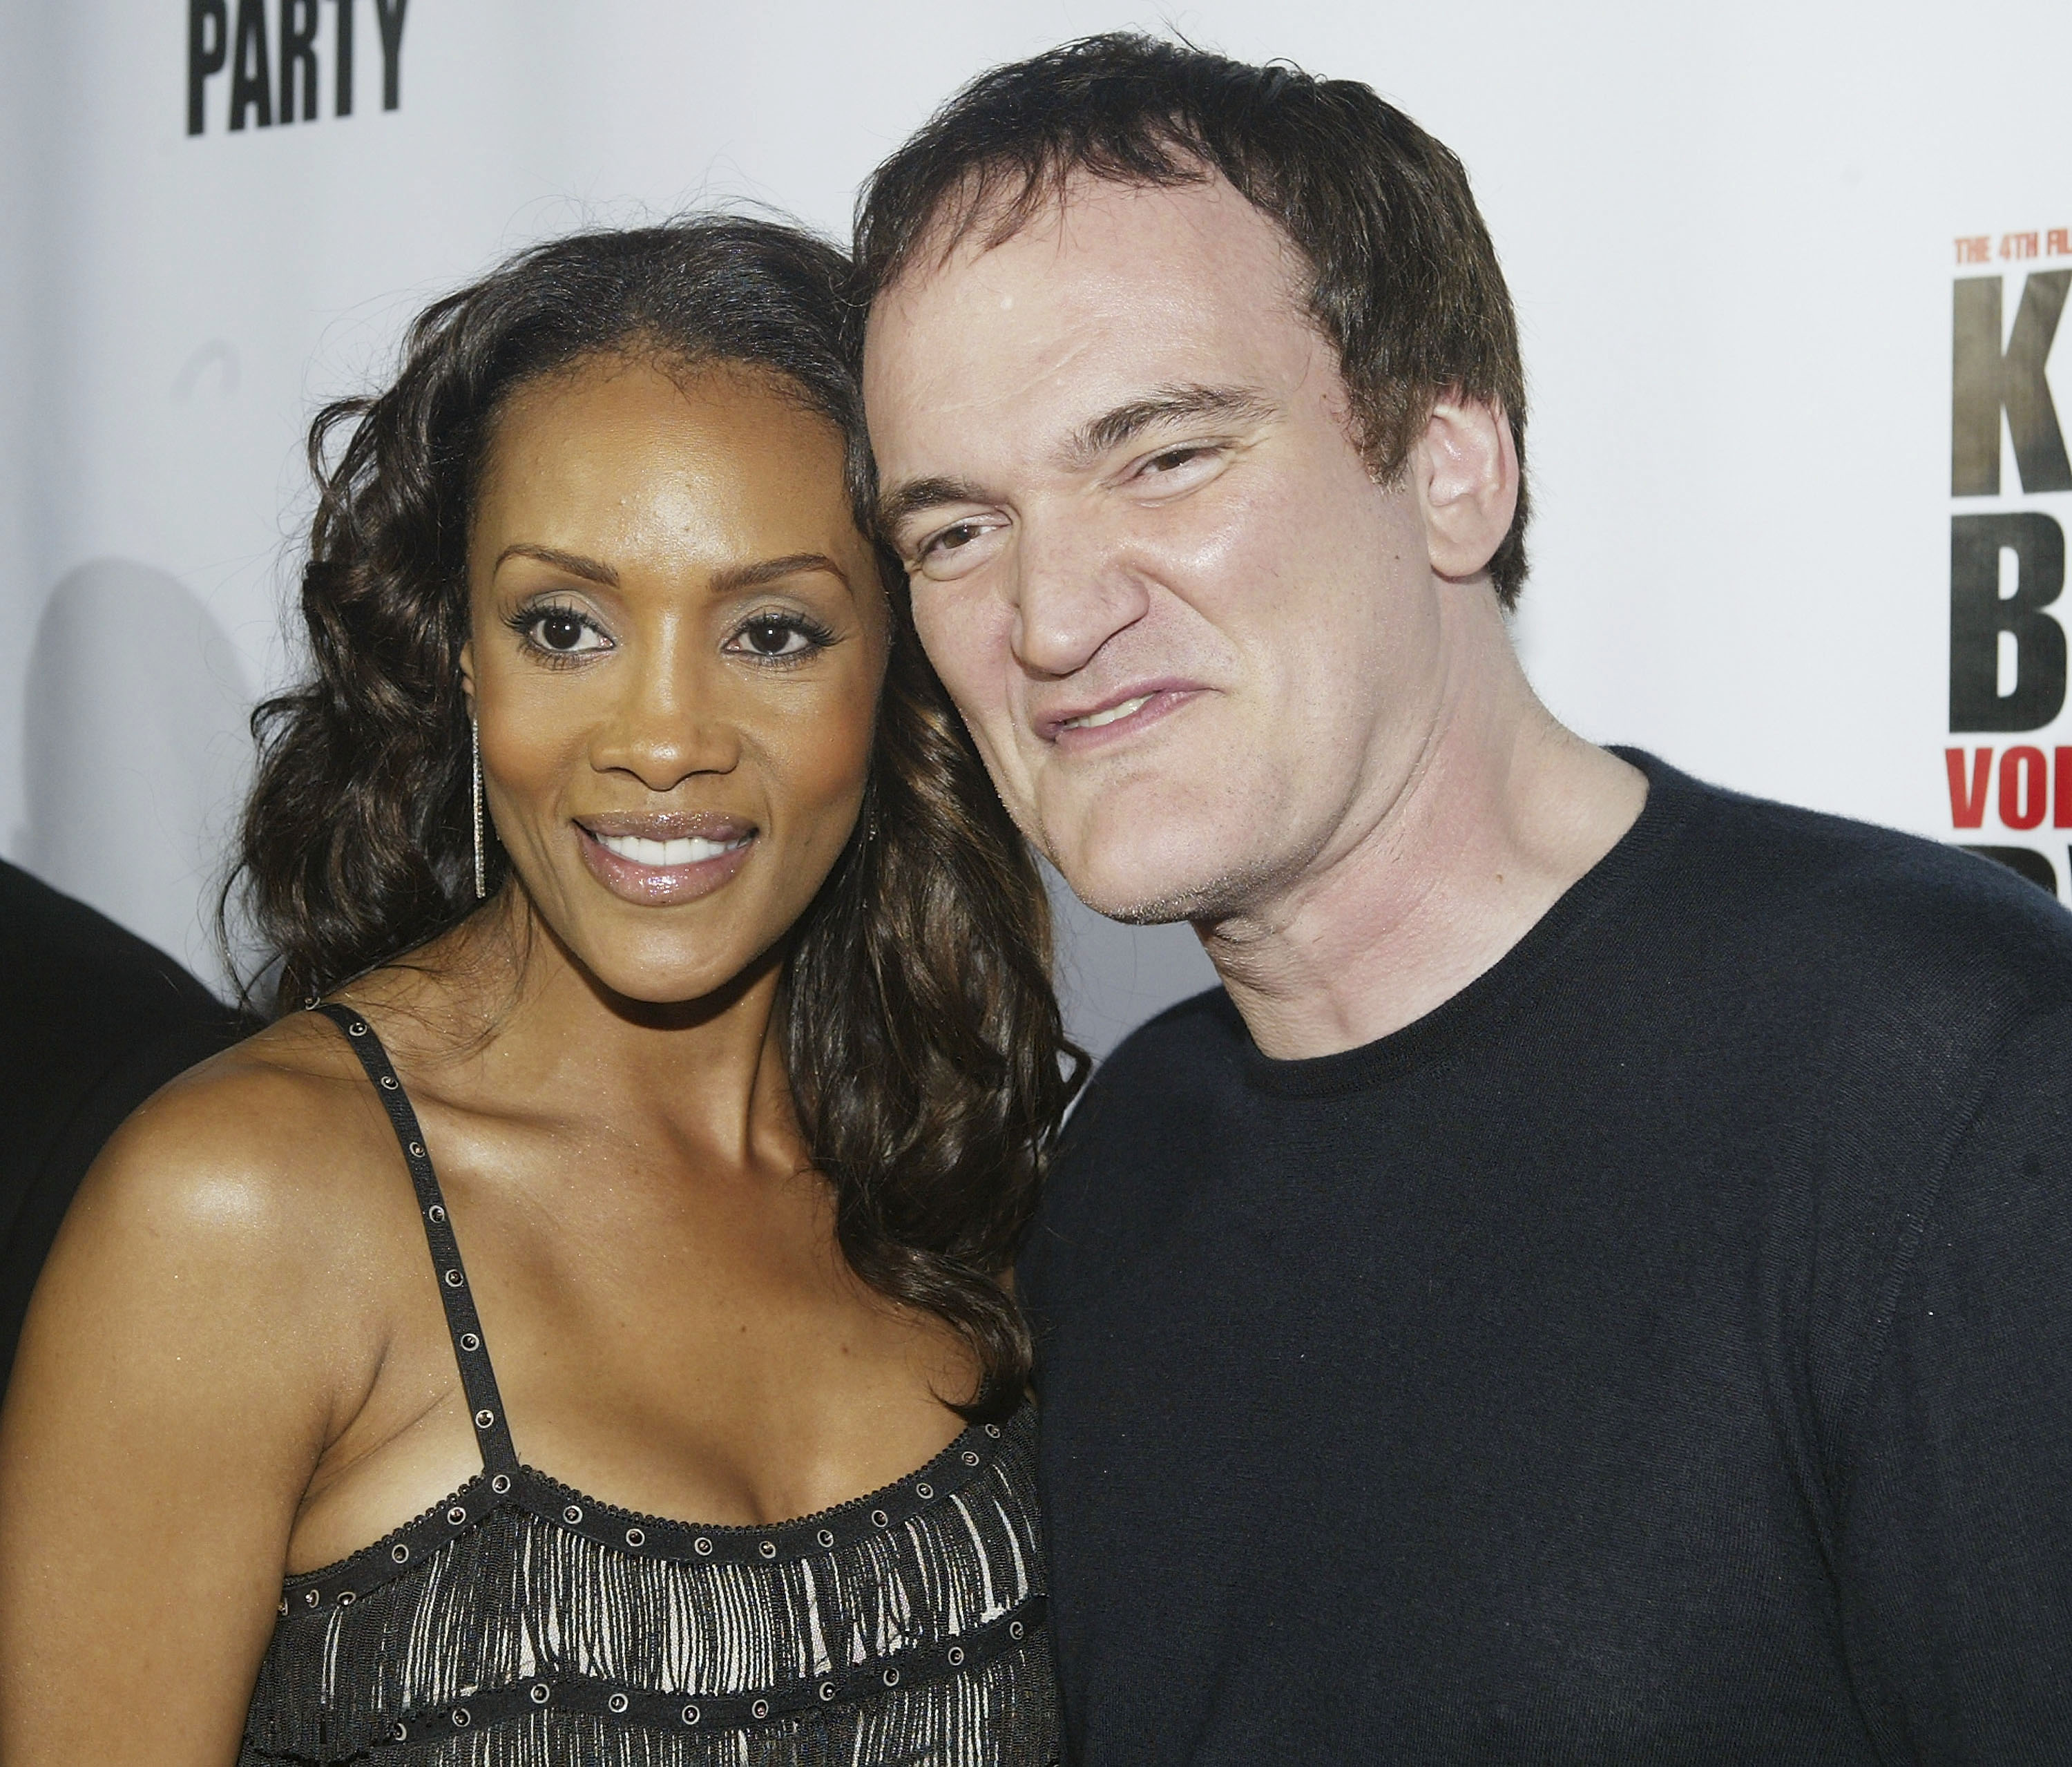 Vivica A. Fox and Quentin Tarantino attend the "Kill Bill Vol. 1 Video Release Party" on April 12, 2004. (Mark Mainz—2004 Getty Images)